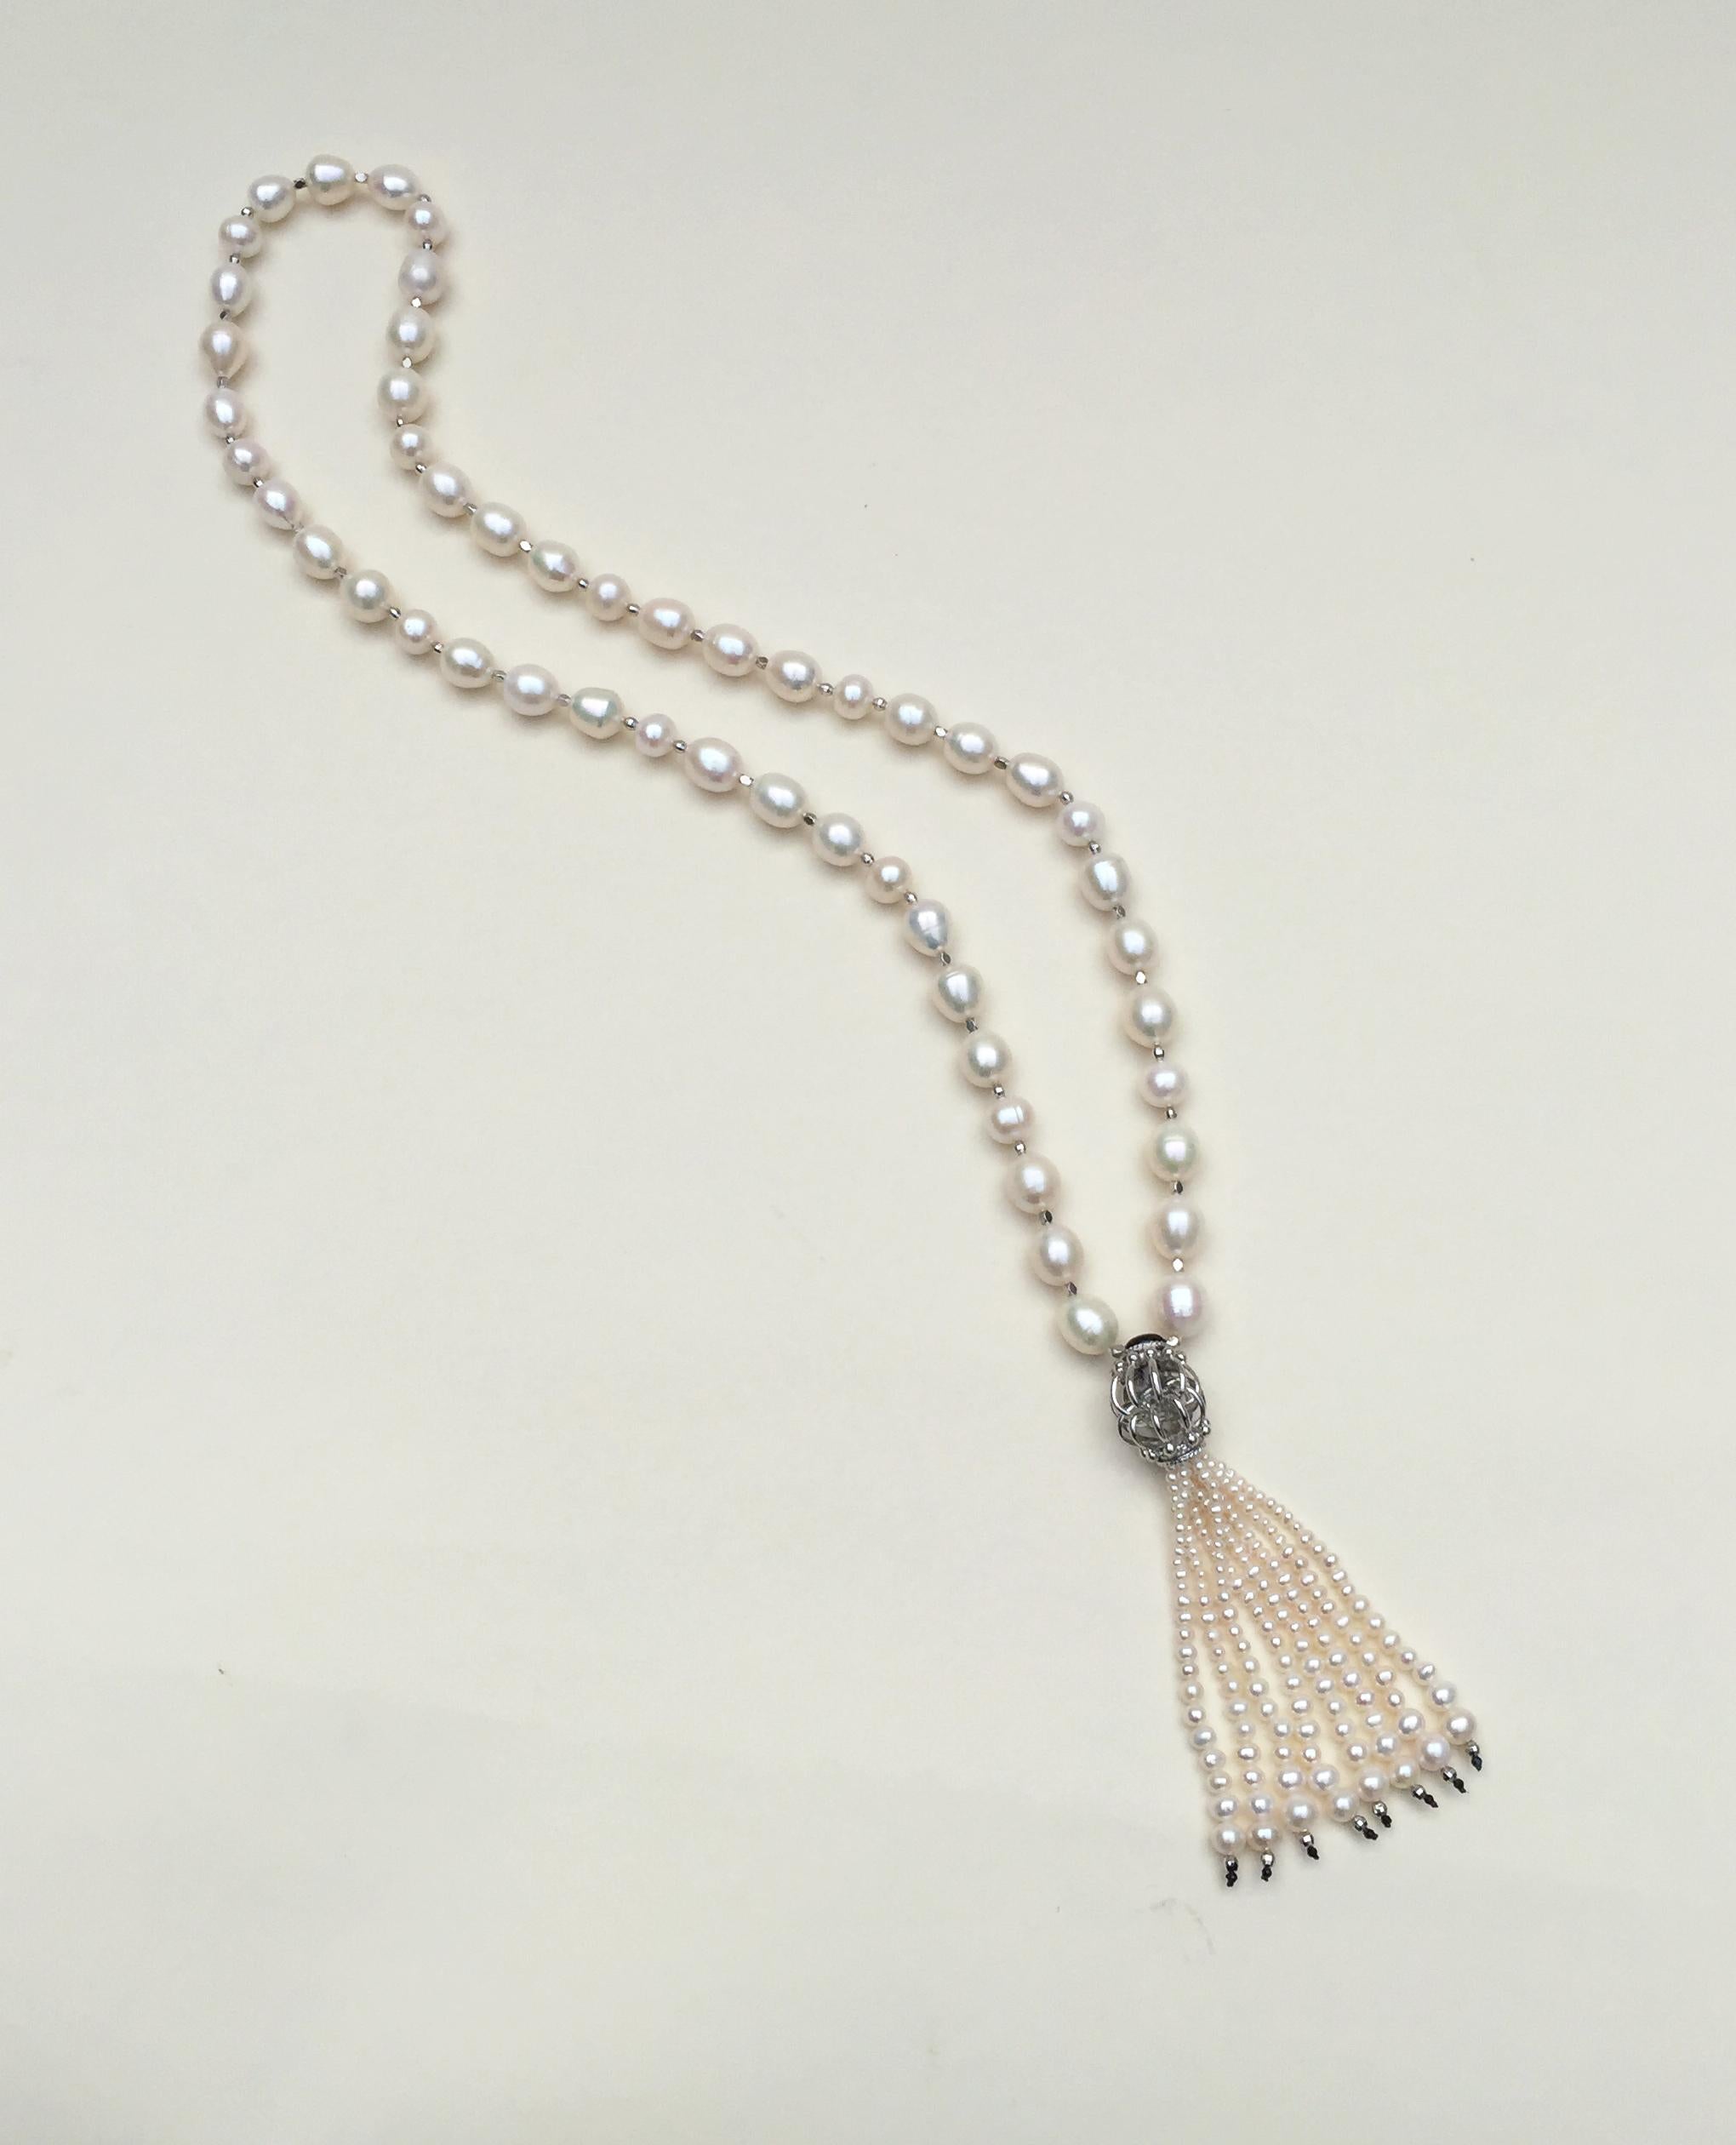 Marina J White Pearl Long Necklace with Sterling Silver Beads and Black Onyx 2